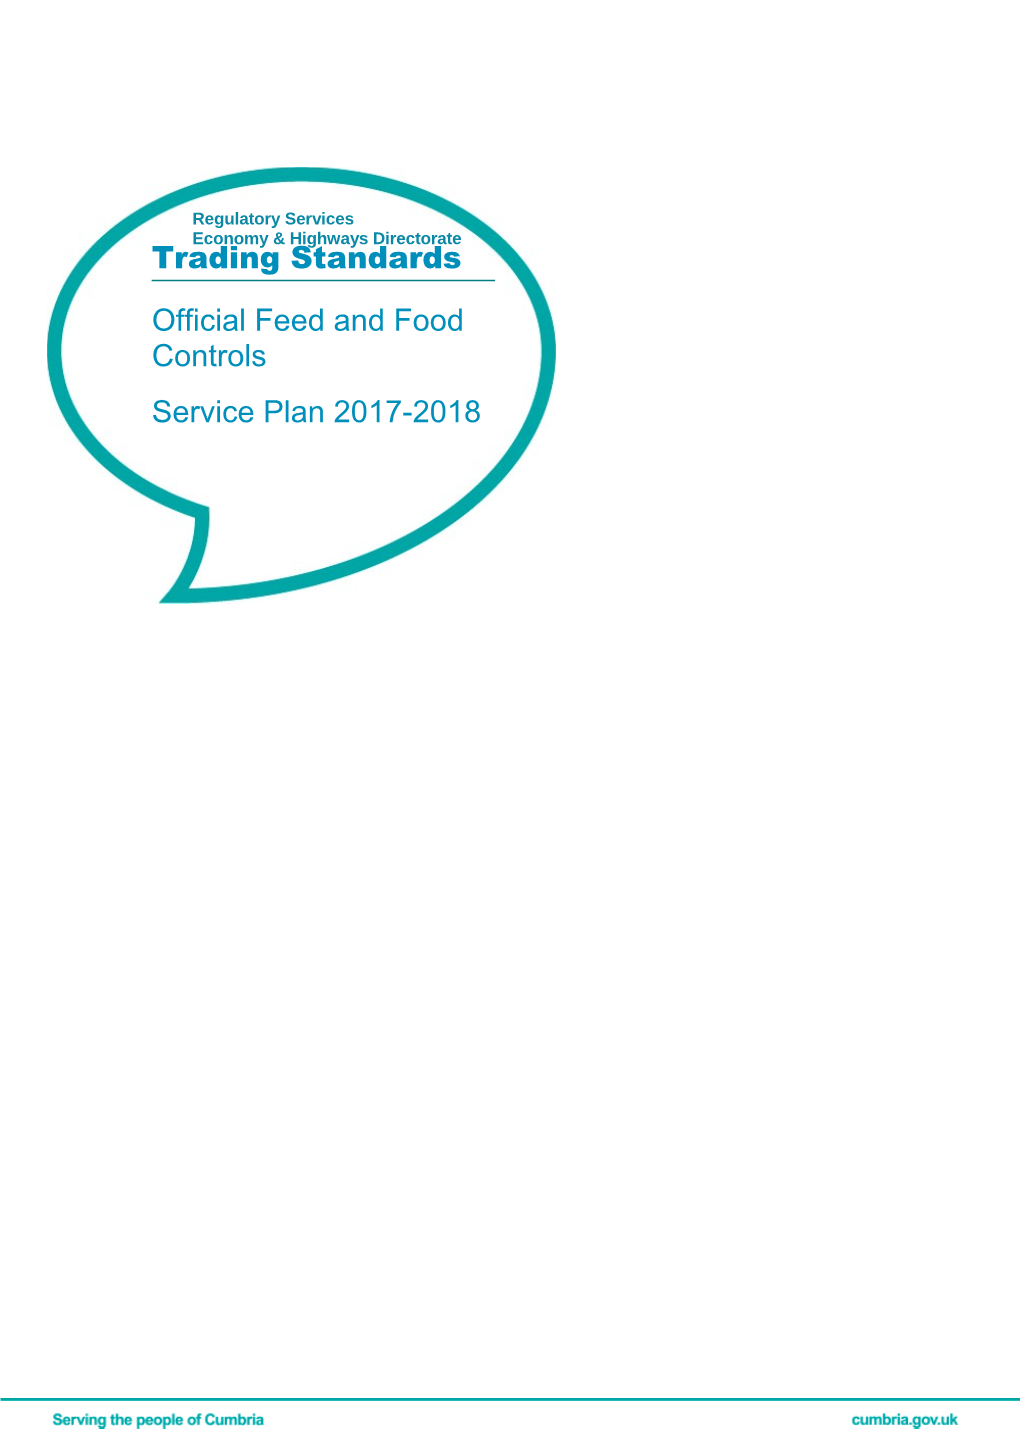 Official Feed and Food Controls Service Plan Guidance